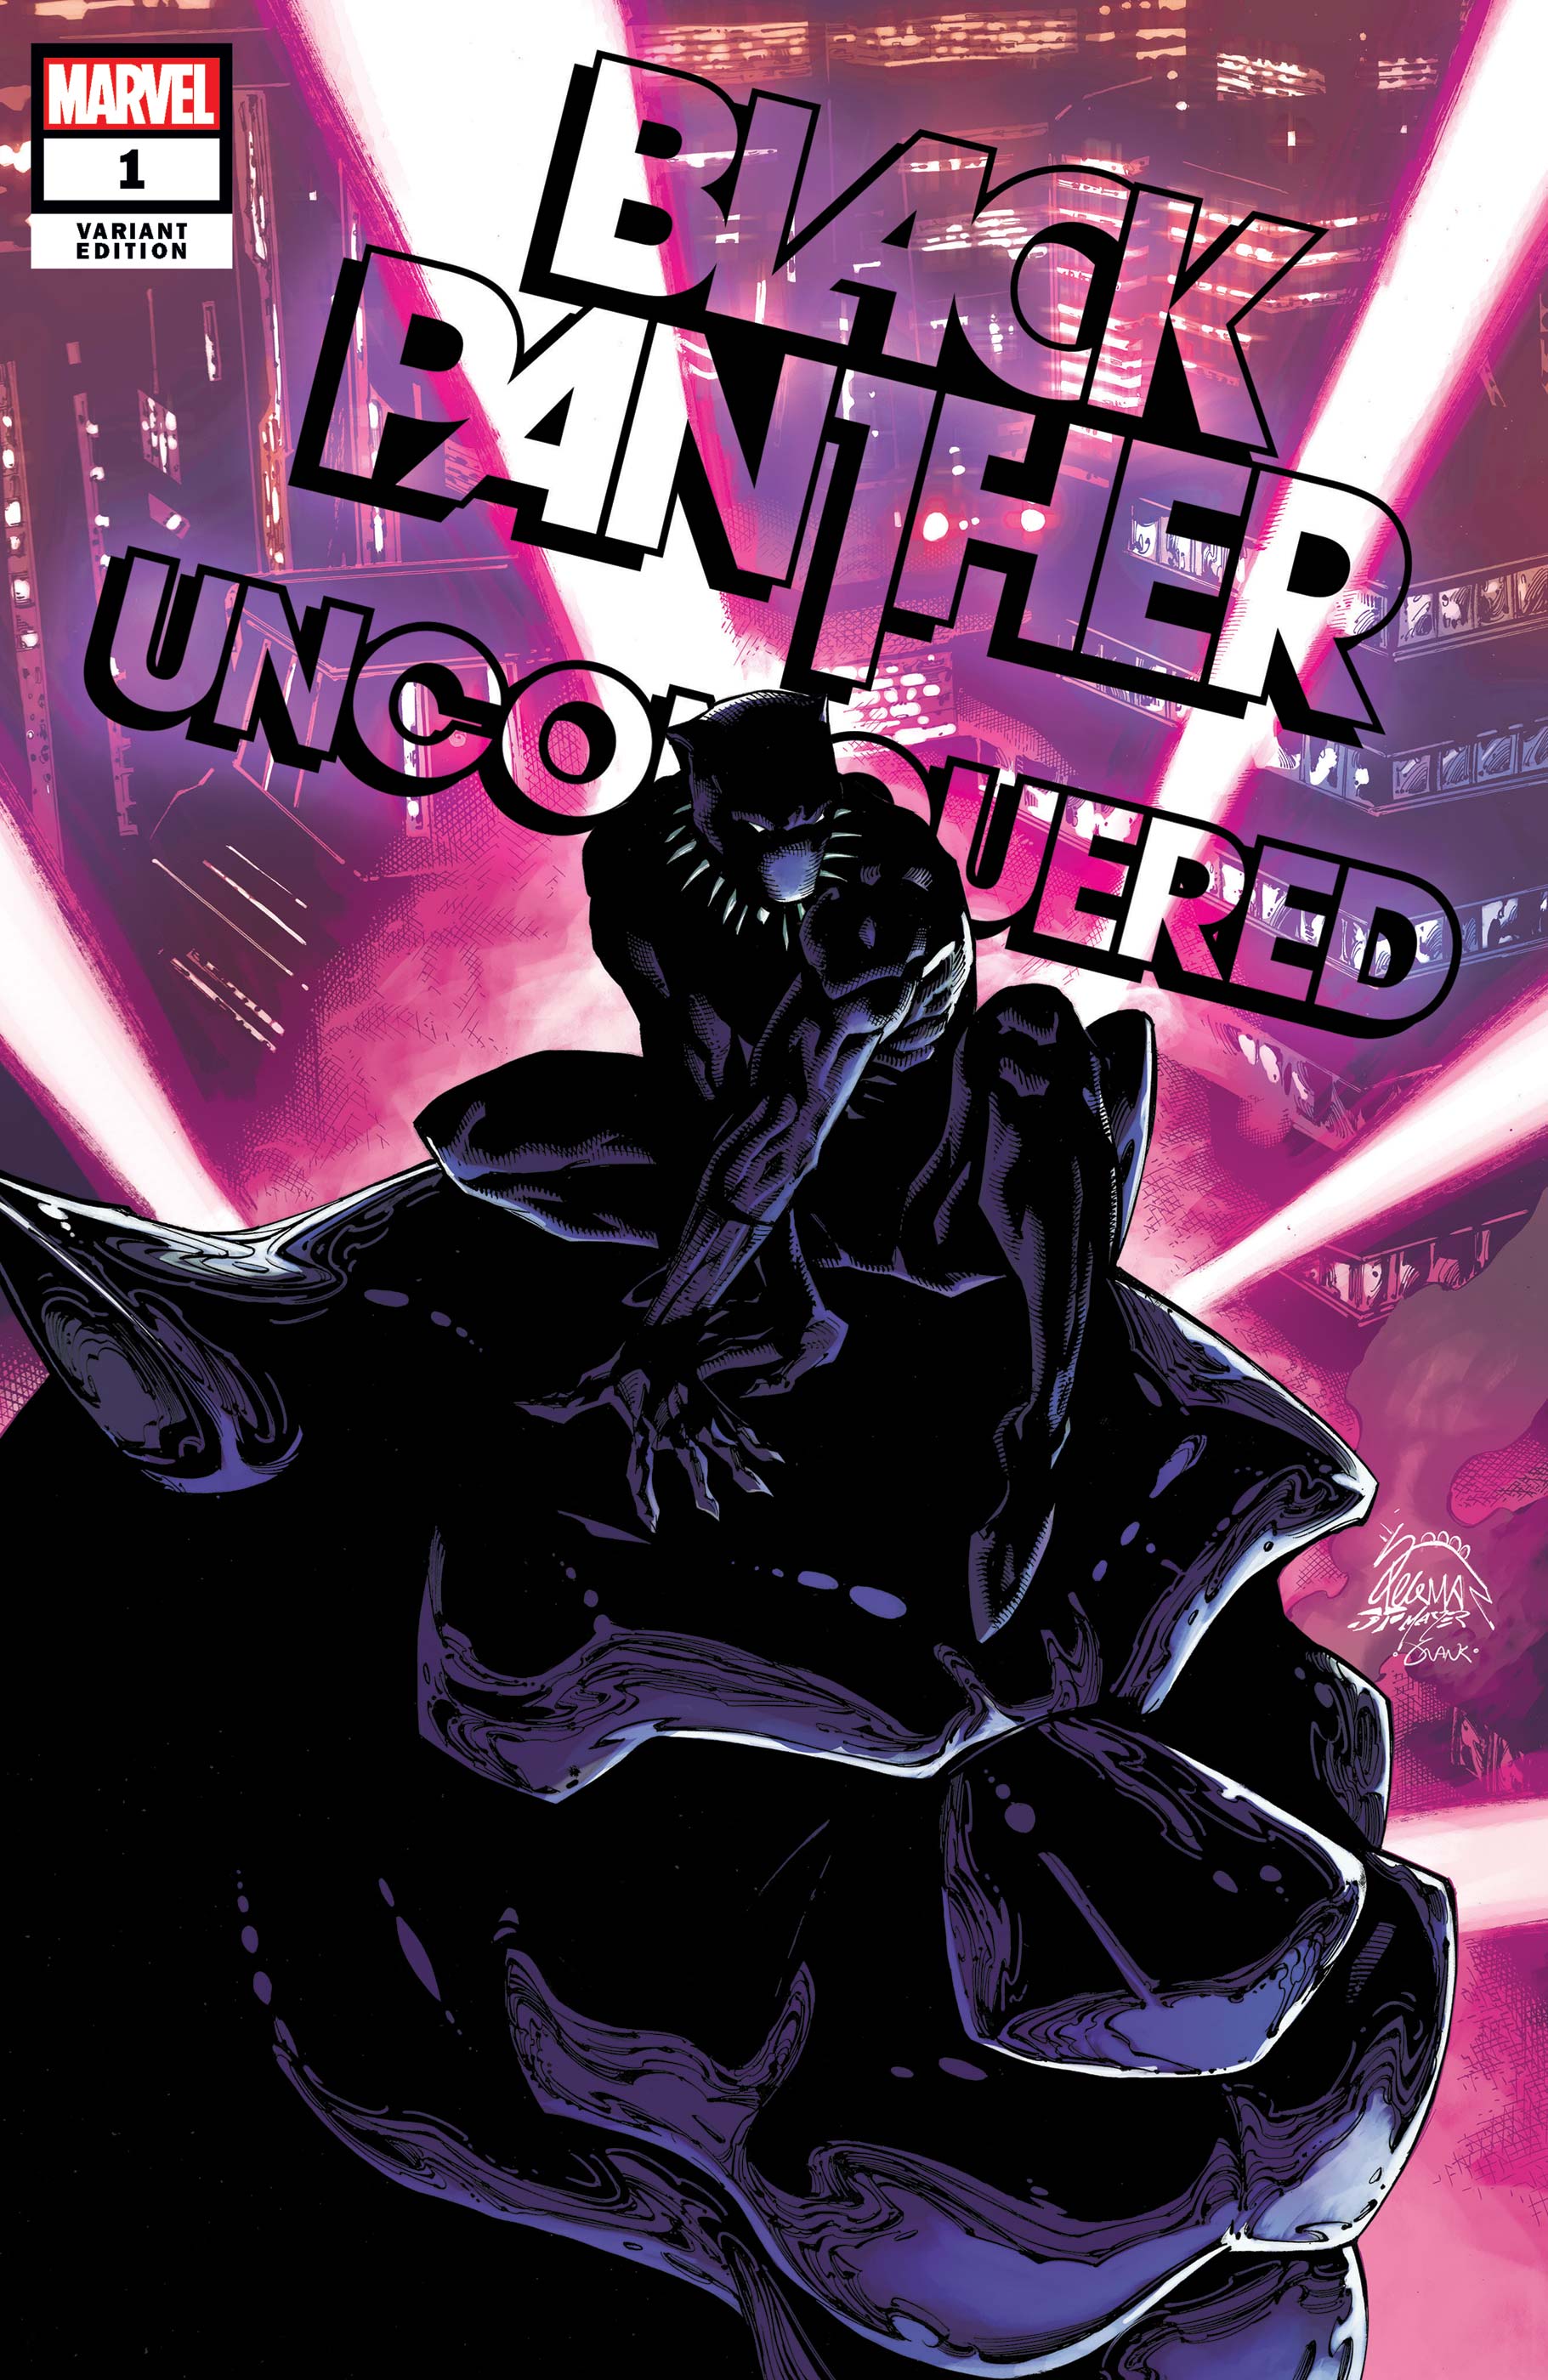 Black Panther: Unconquered (2022) #1 (Variant)